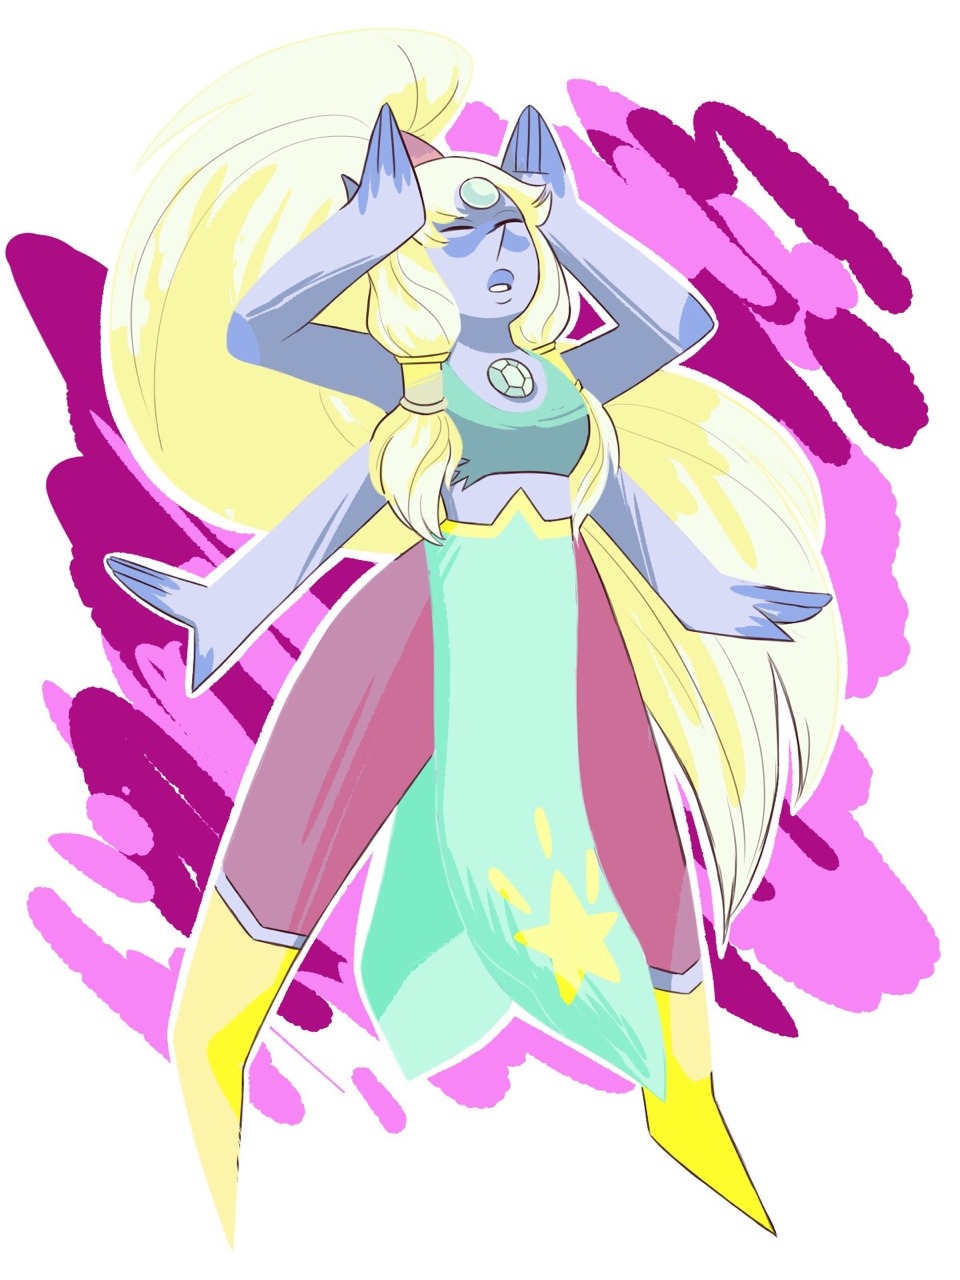 With or without the shiny? Here's Opal cause after her last appearance I really wanted to draw her again uwu